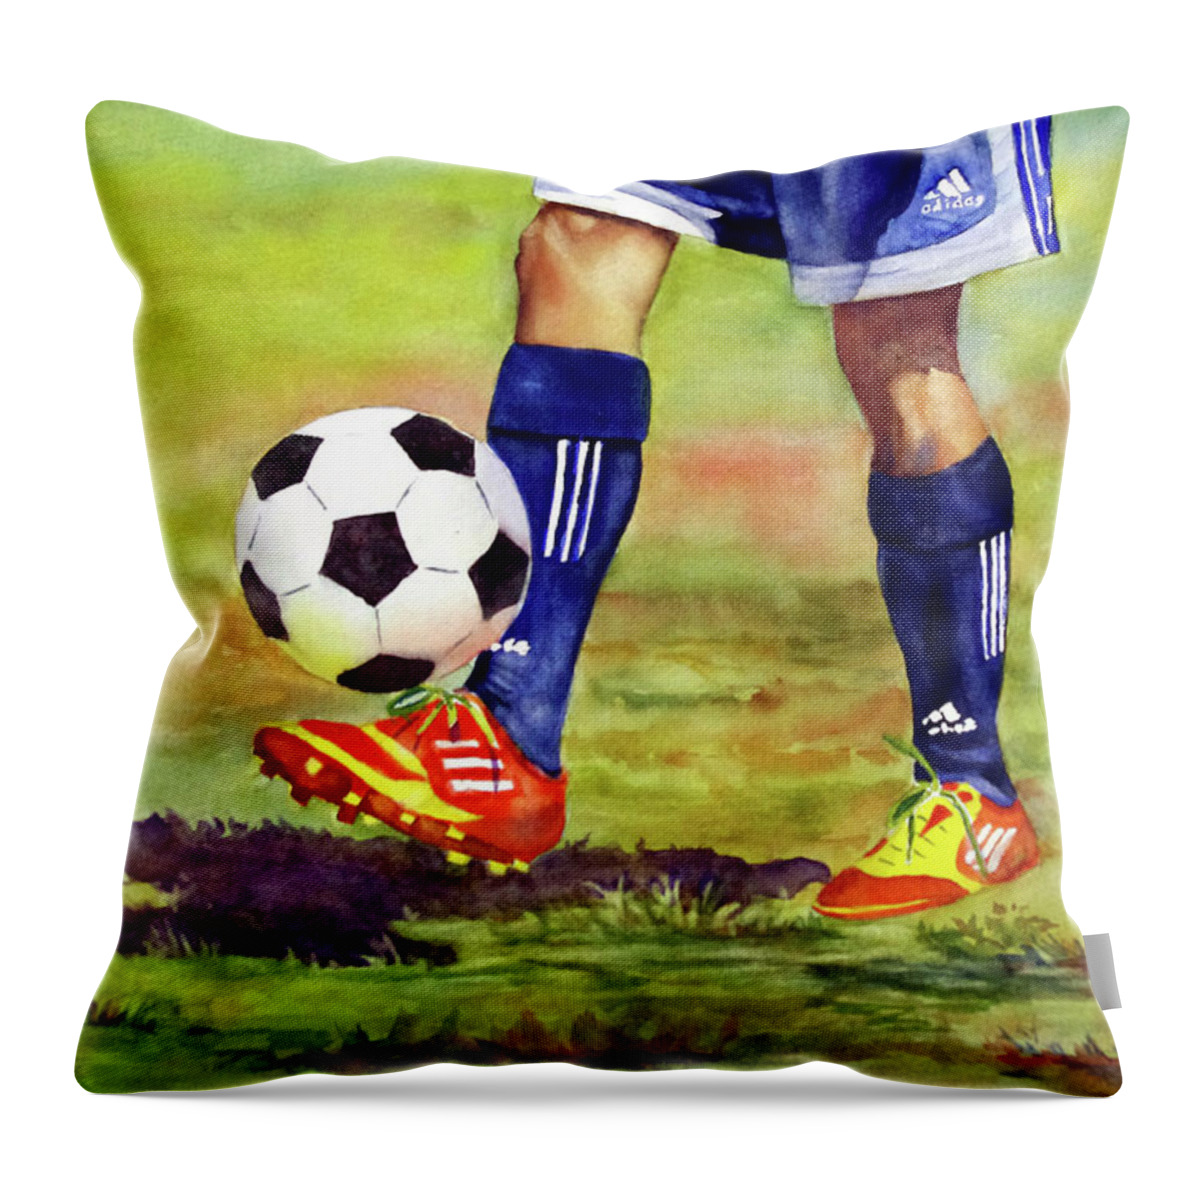 Soccer Throw Pillow featuring the painting Great Legs by Beth Fontenot